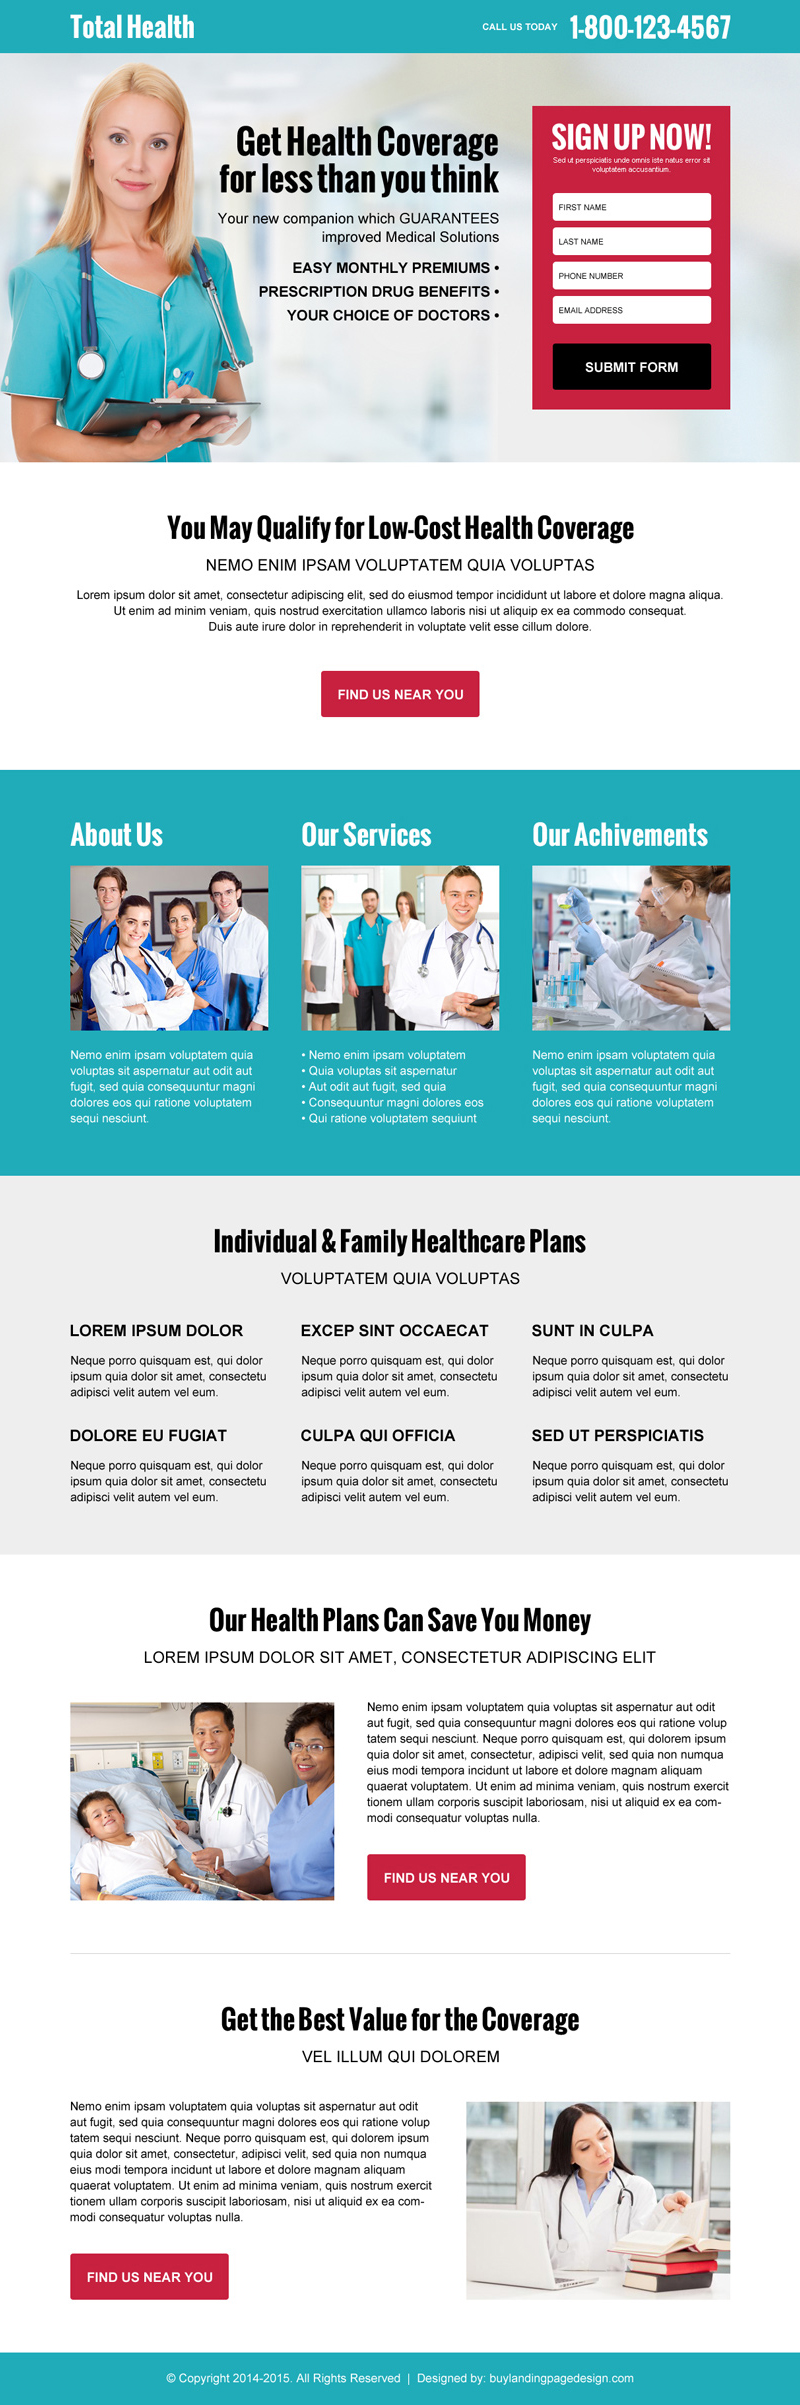 free-medical-health-coverage-quote-service-high-converting-landing-page-design-template-018